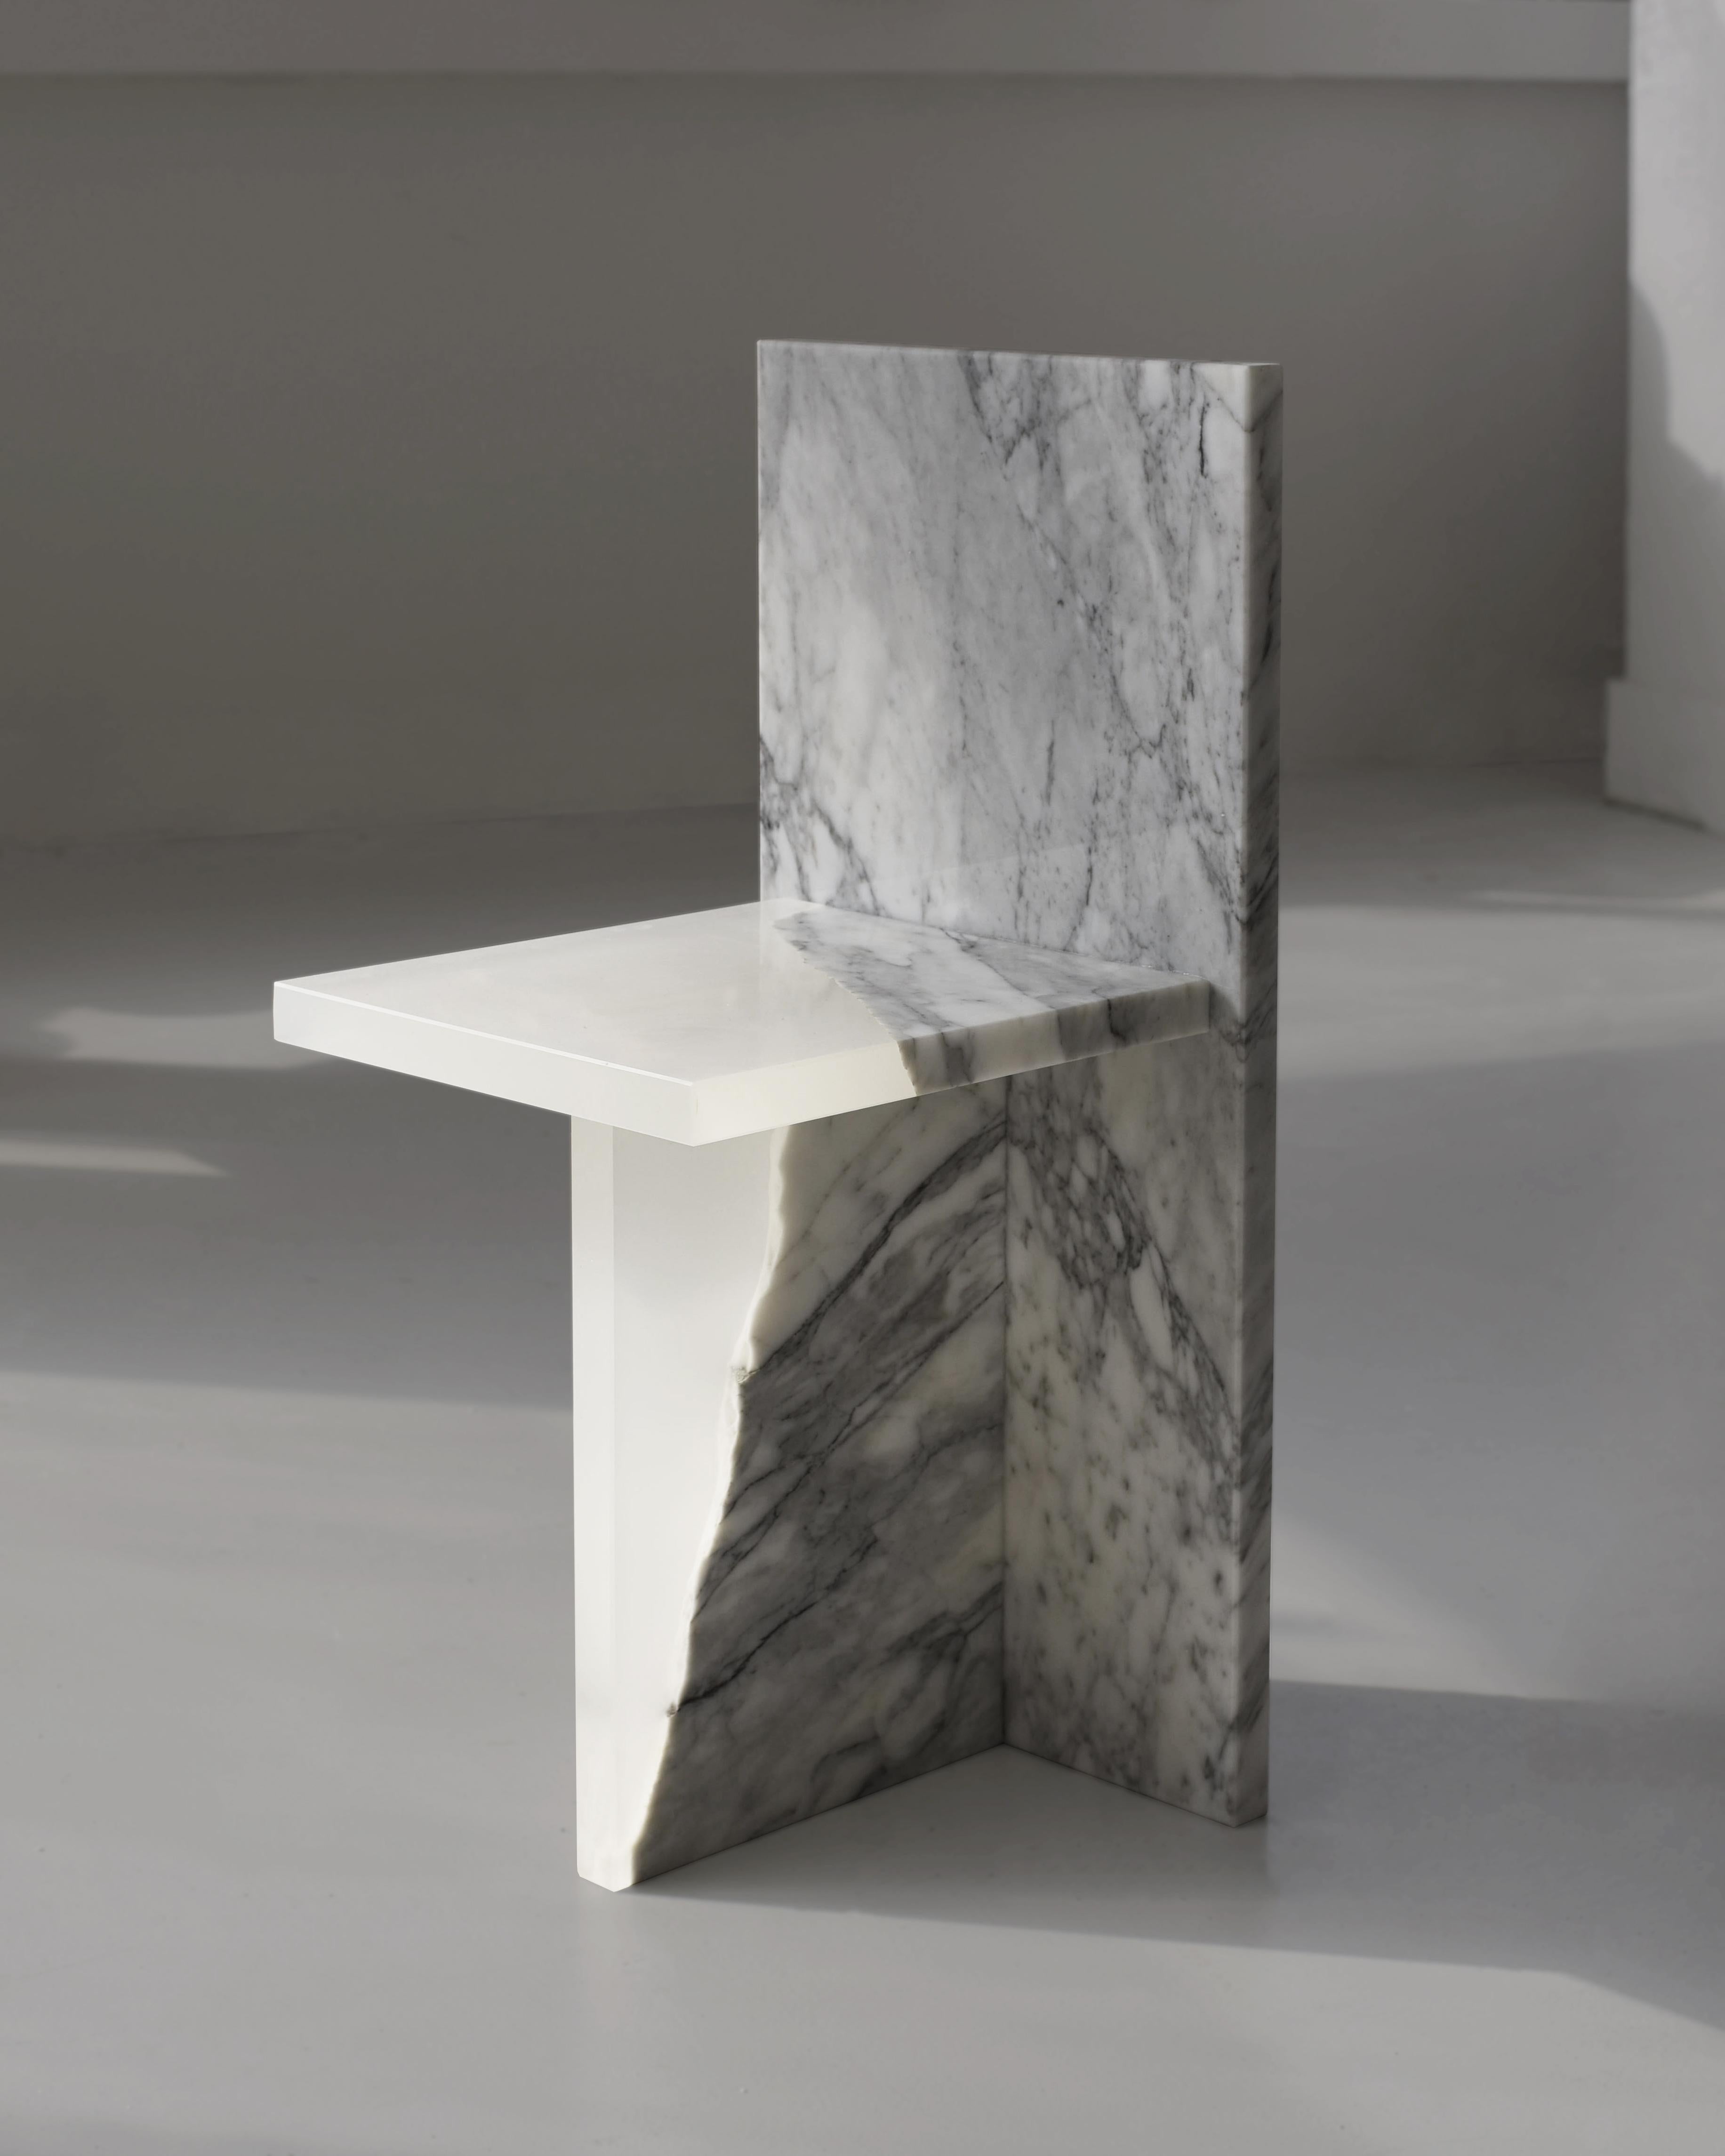 Organic Modern White Crystal Resin and Marble, Fragment Chair, Jang Hea Kyoung